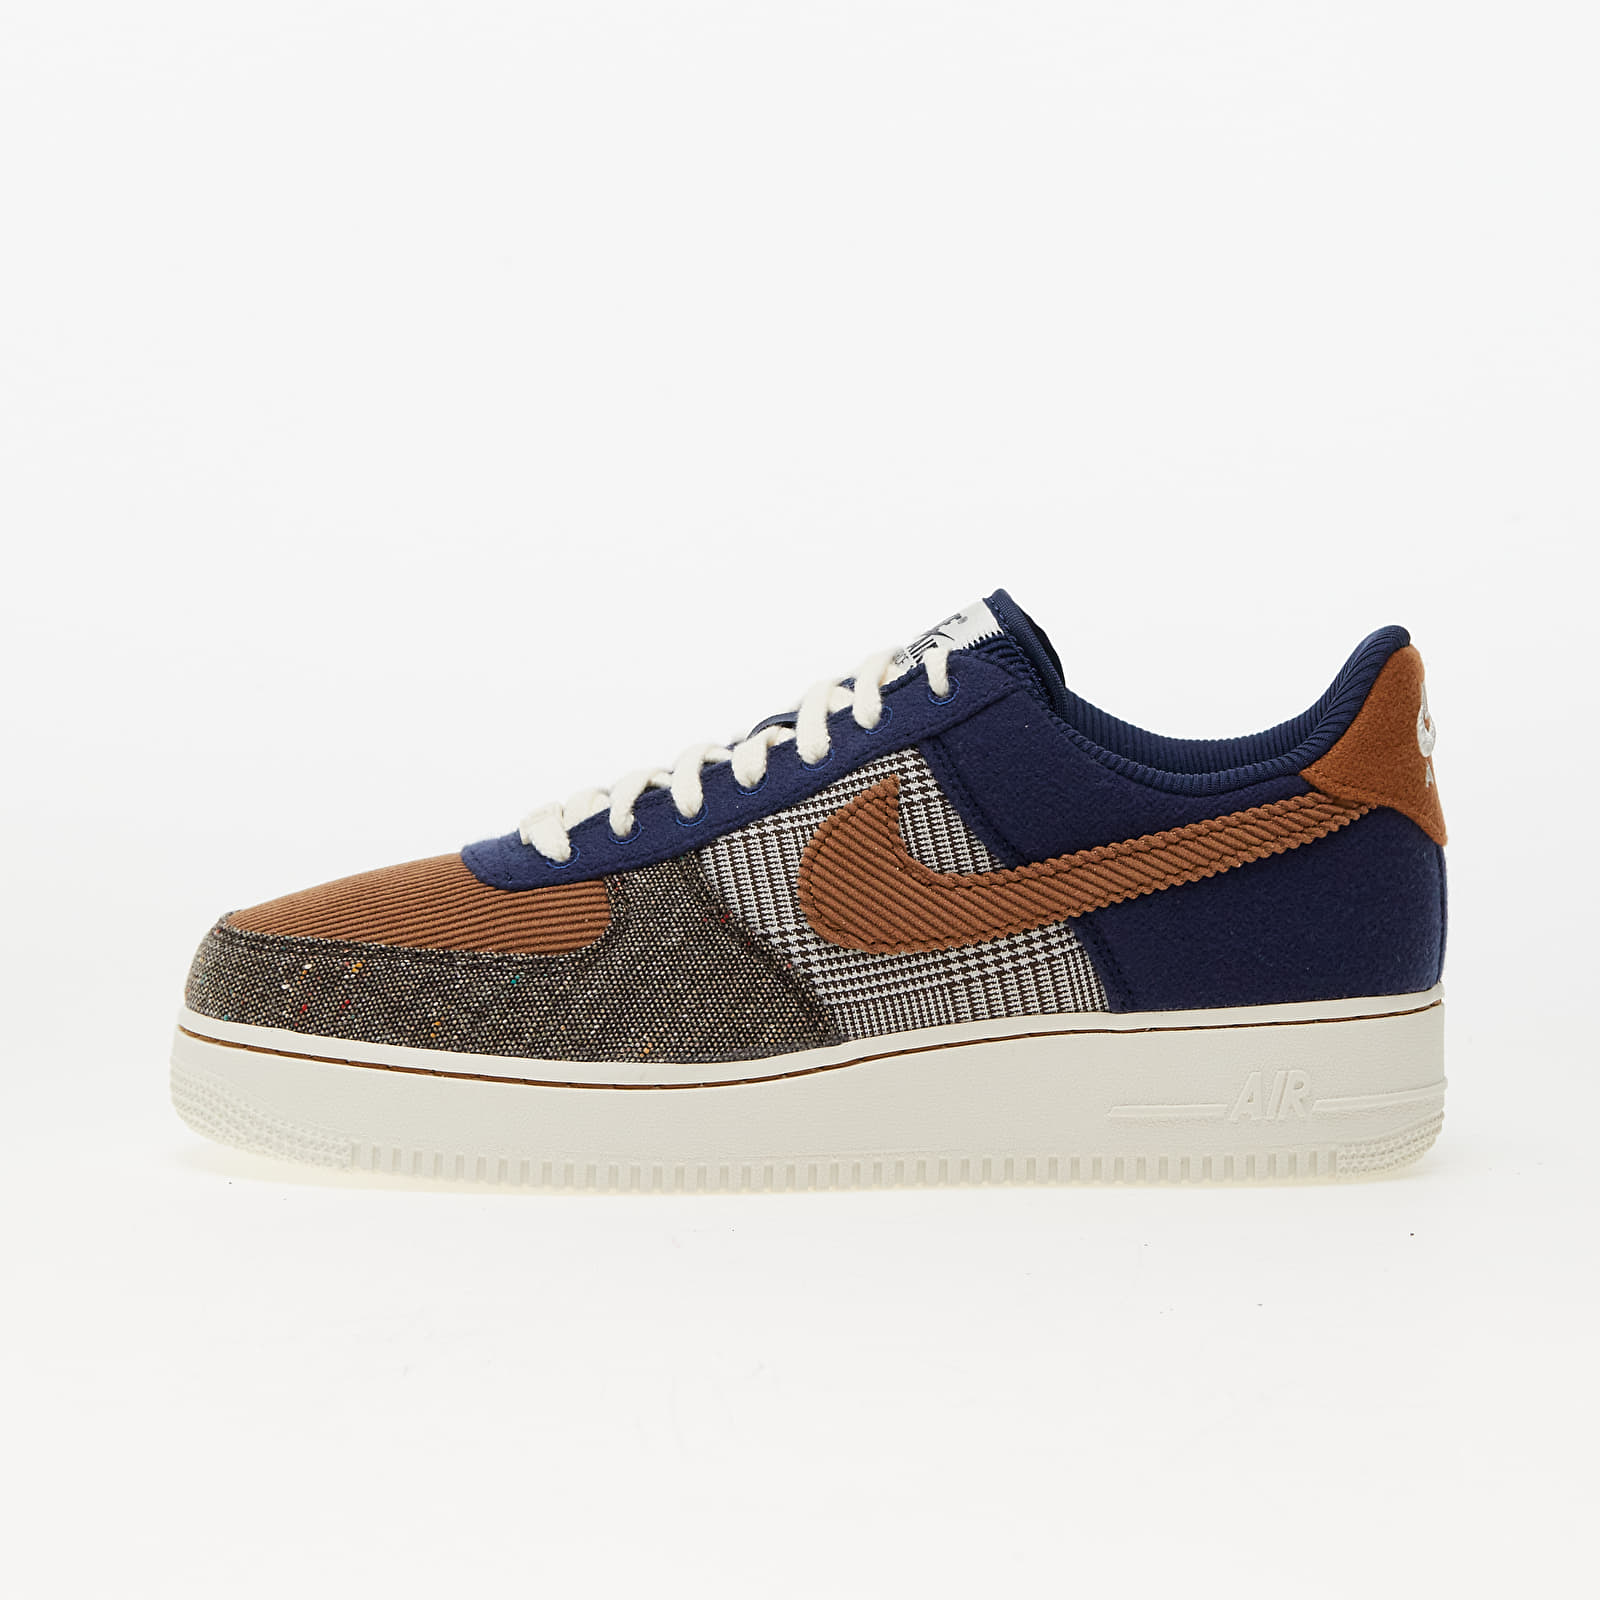 Levně Nike Air Force 1 '07 Premium Midnight Navy/ Ale Brown-Pale Ivory